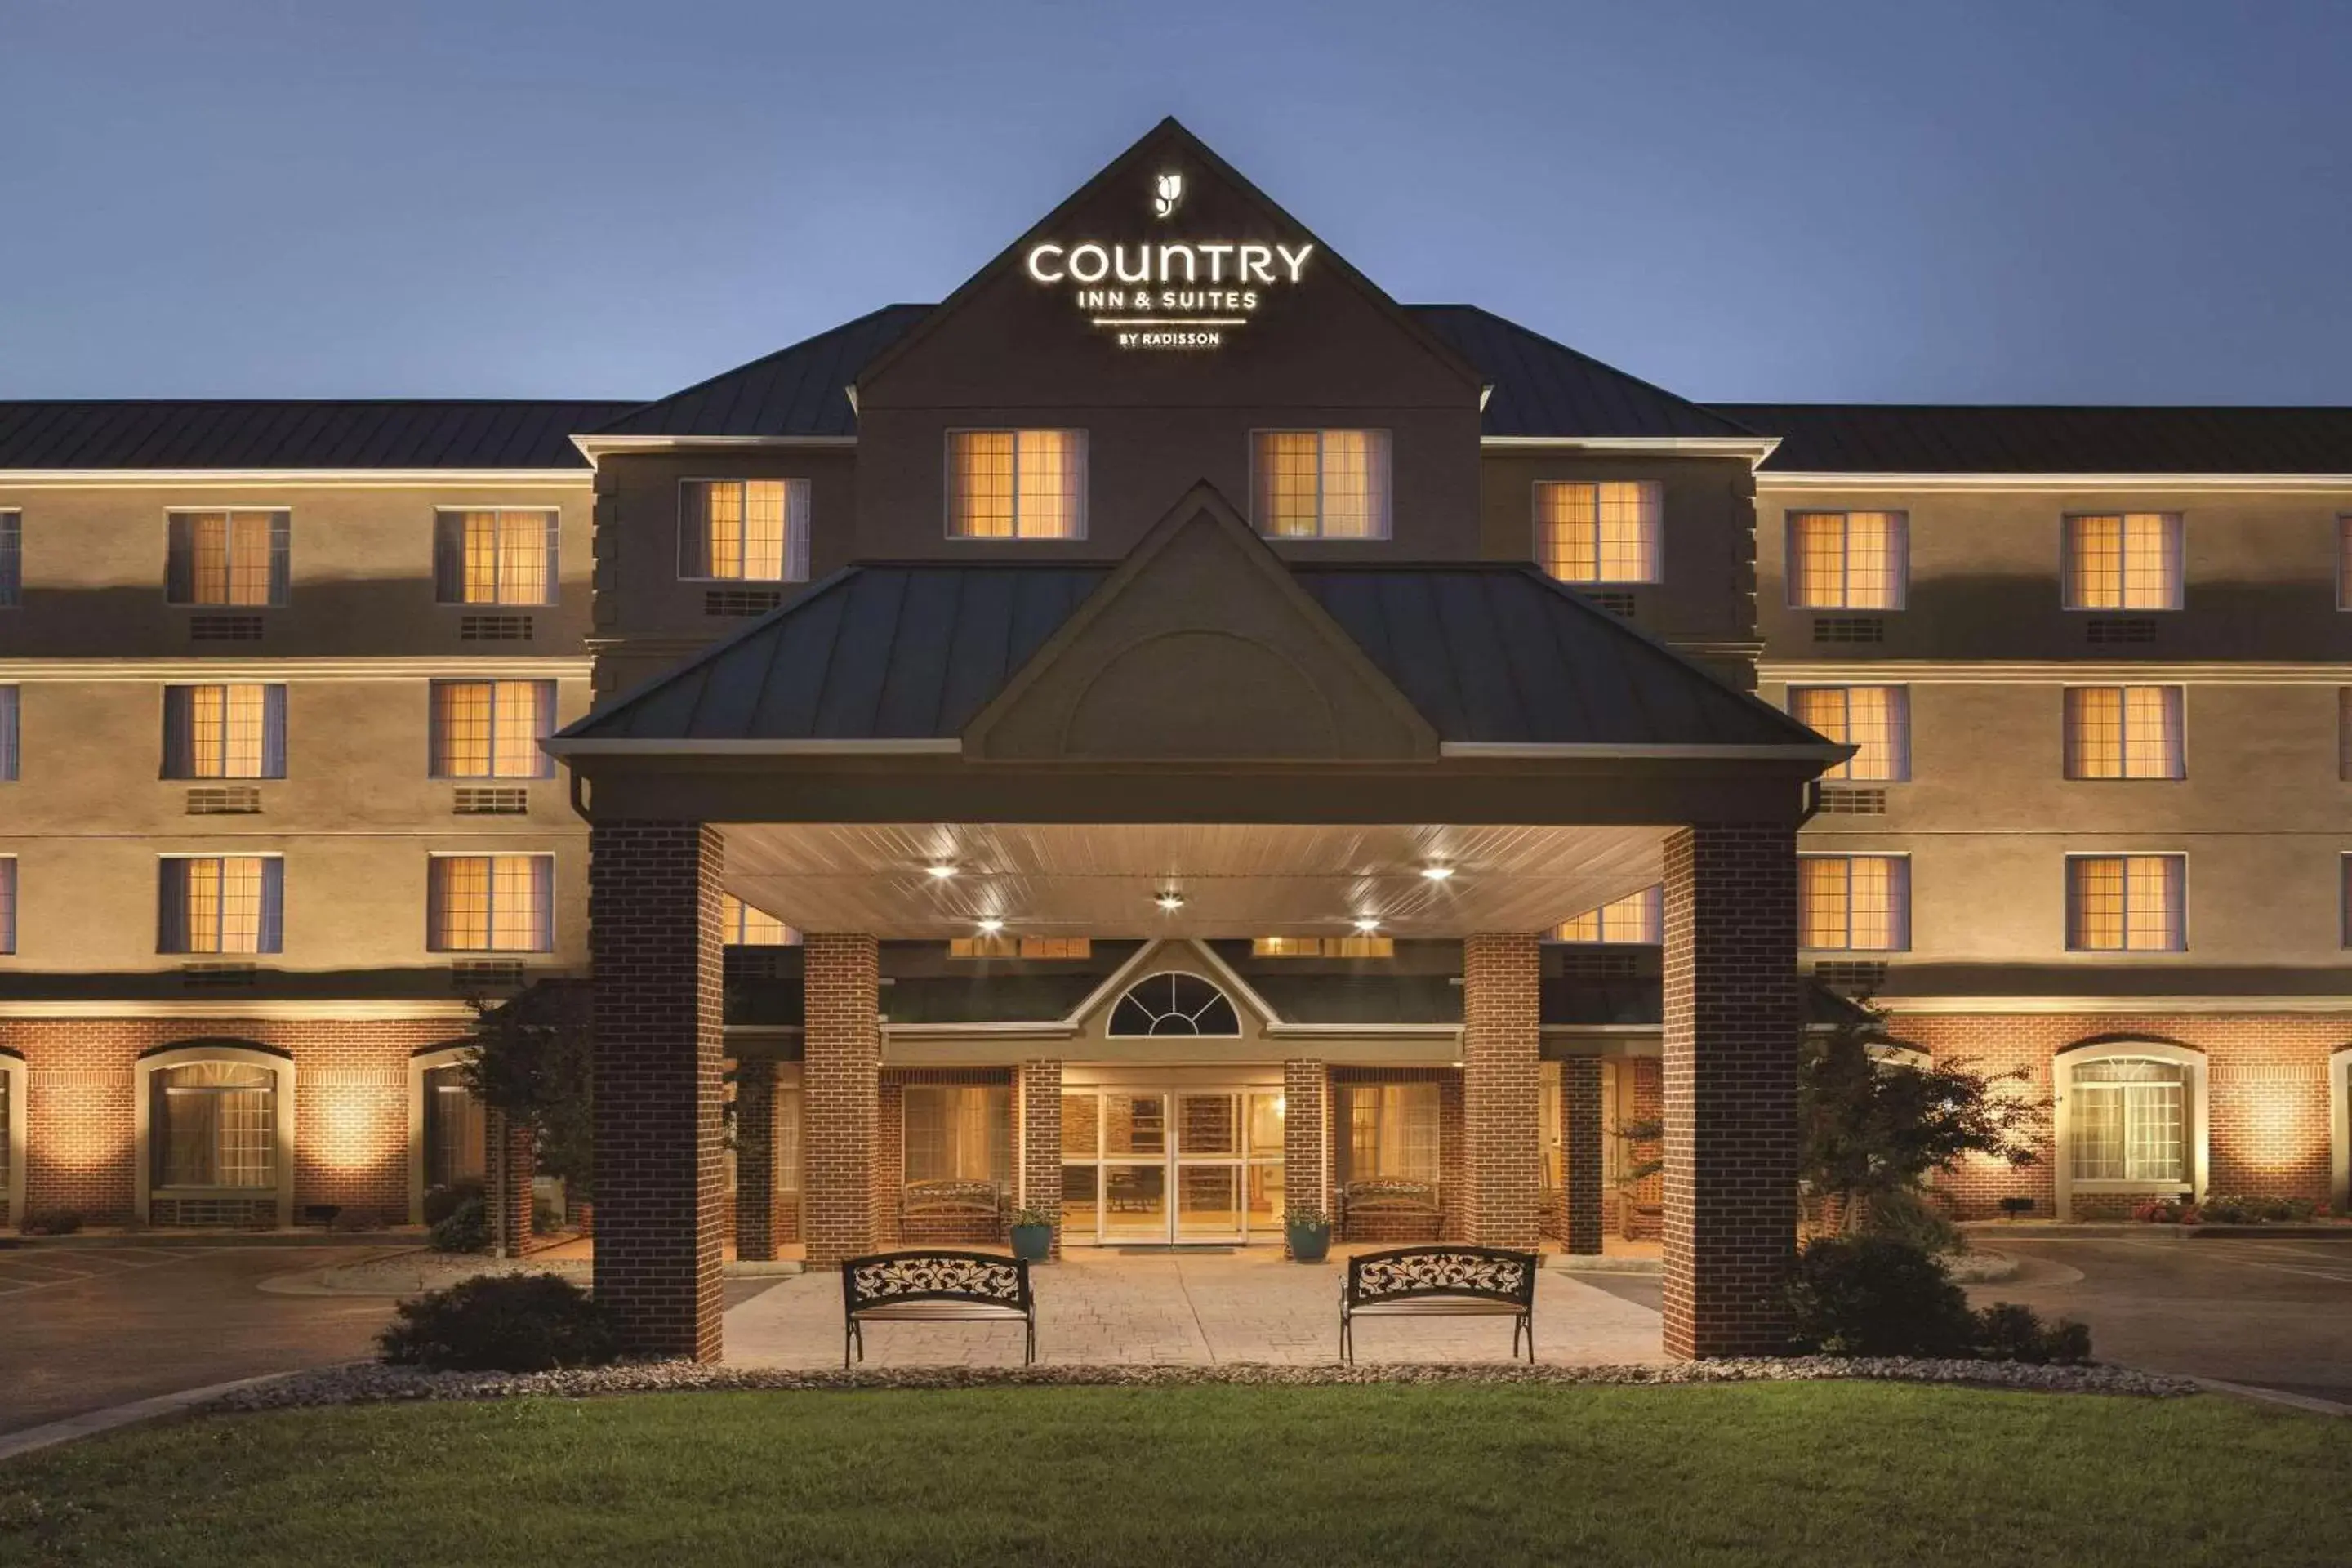 Property Building in Country Inn & Suites by Radisson, Lexington, VA